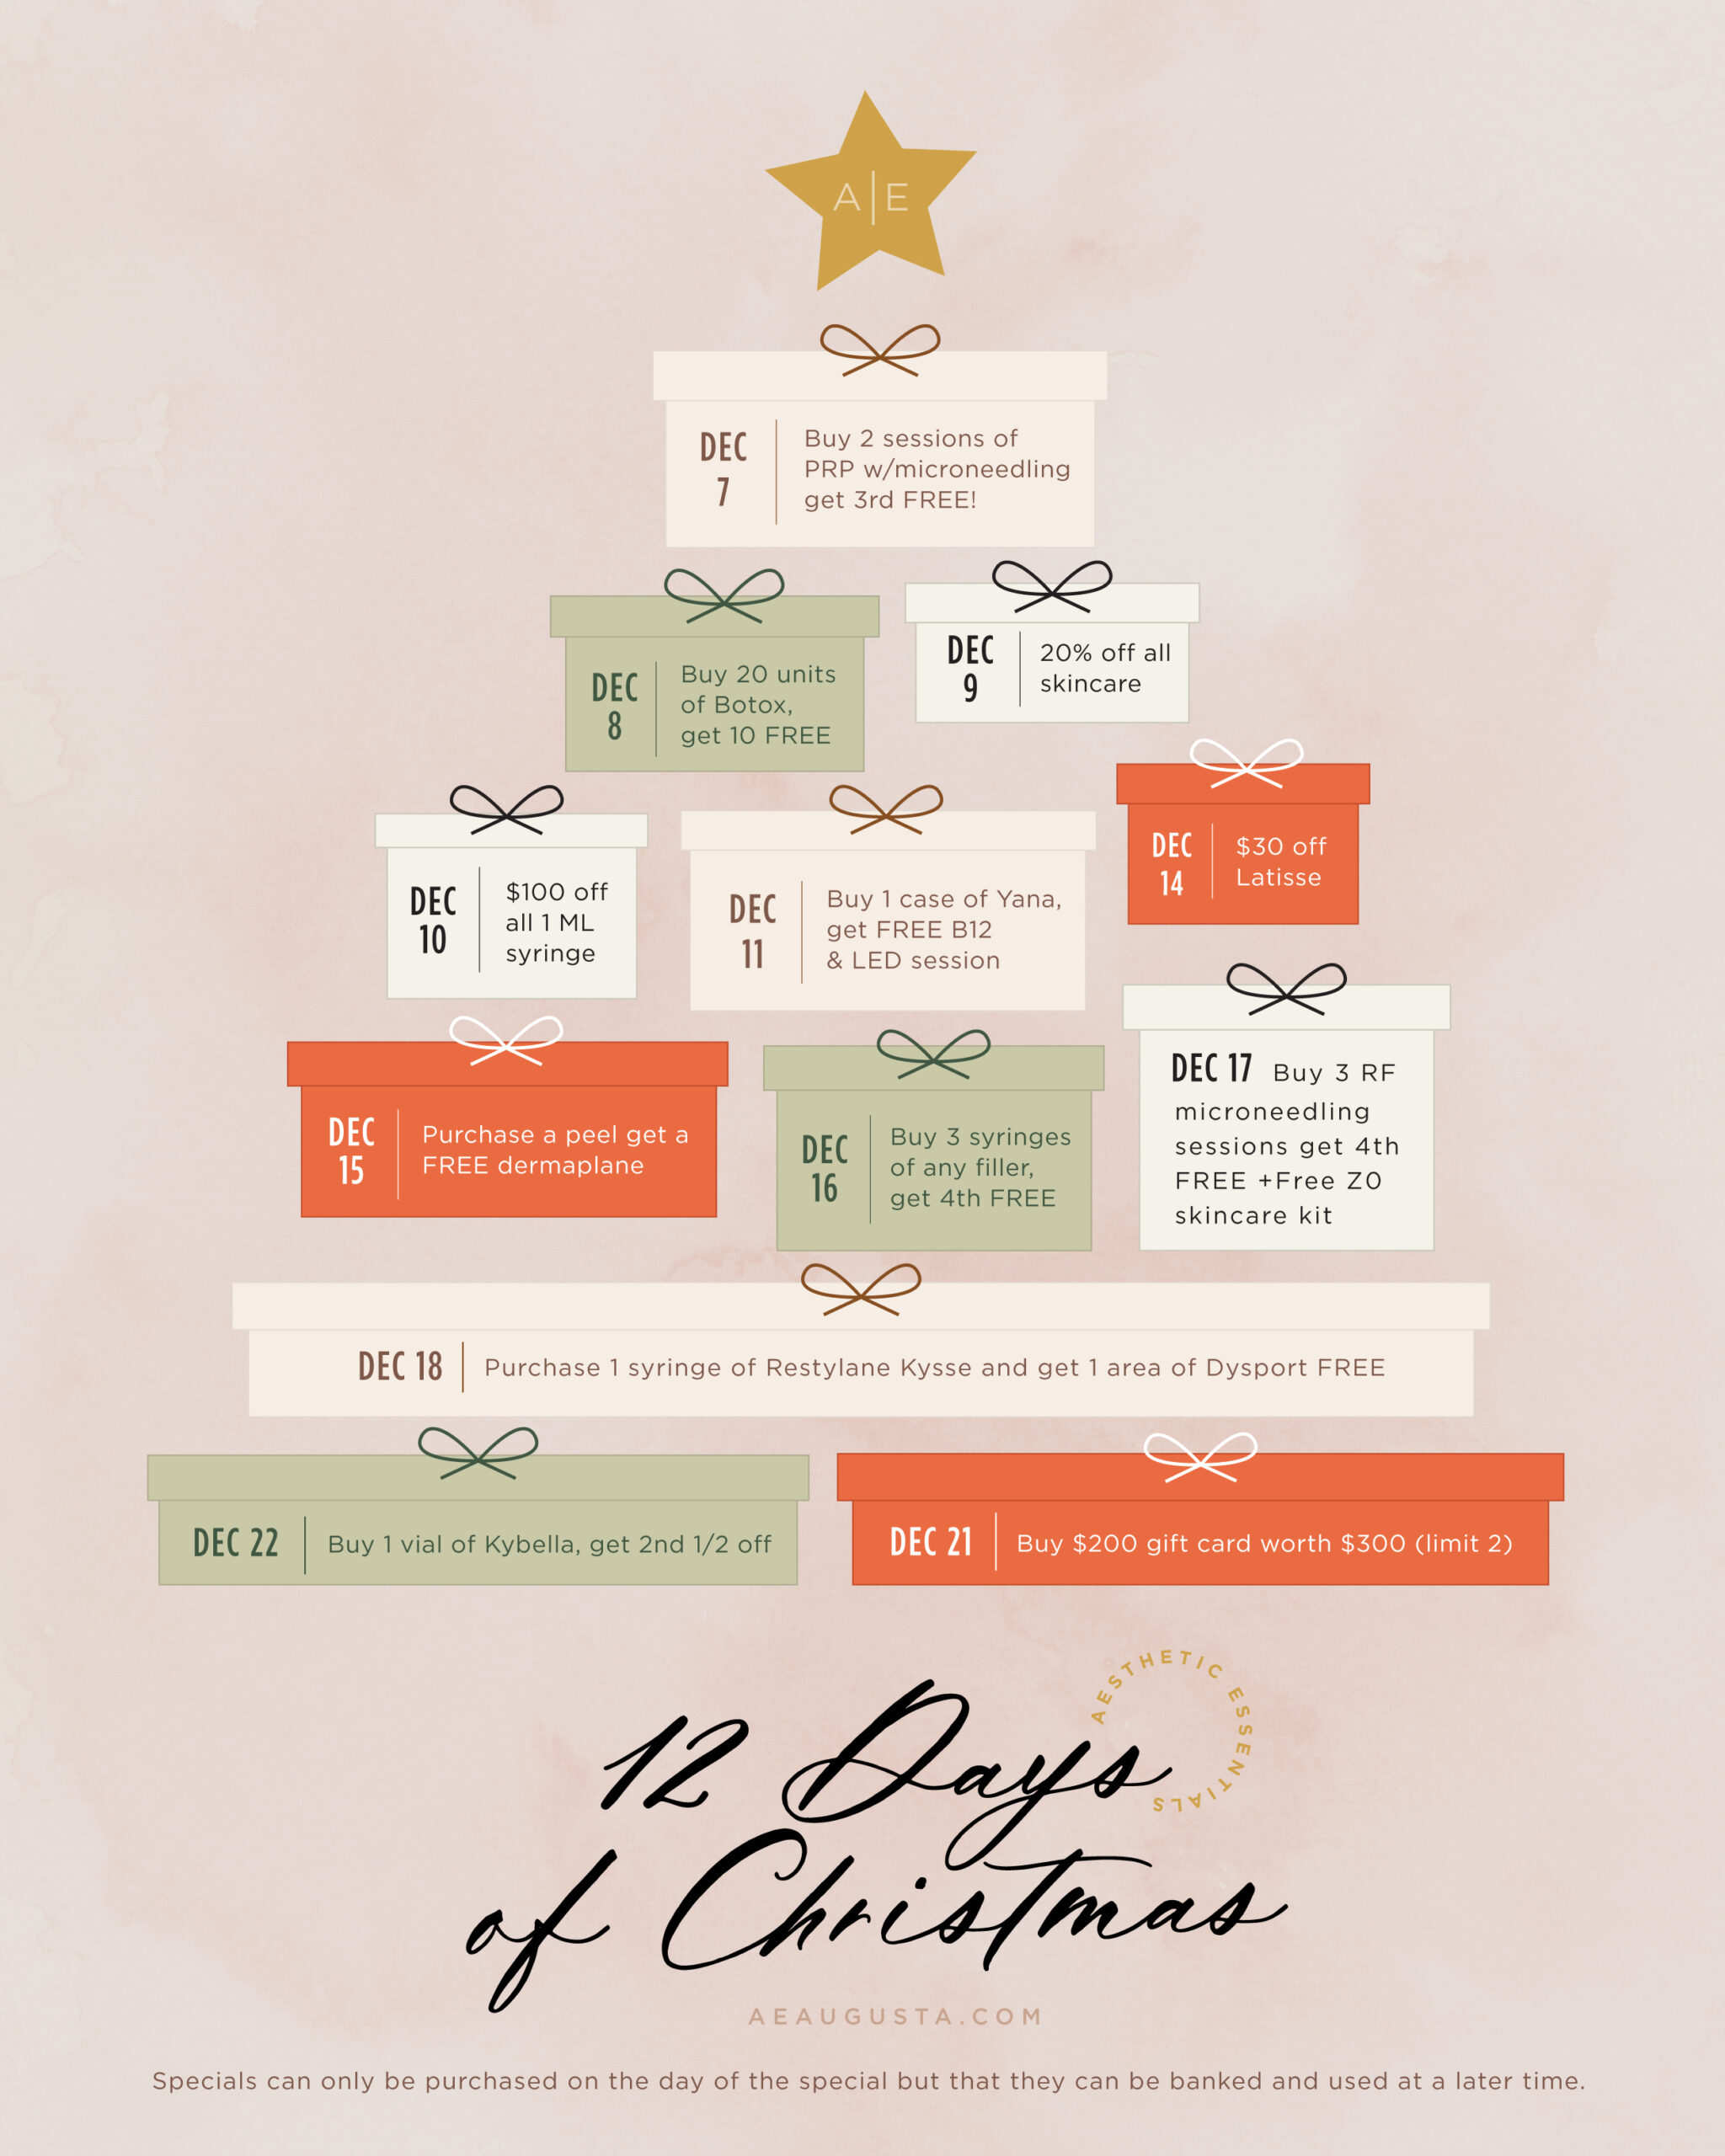 Celebrate the 12 Days of Christmas is AE!